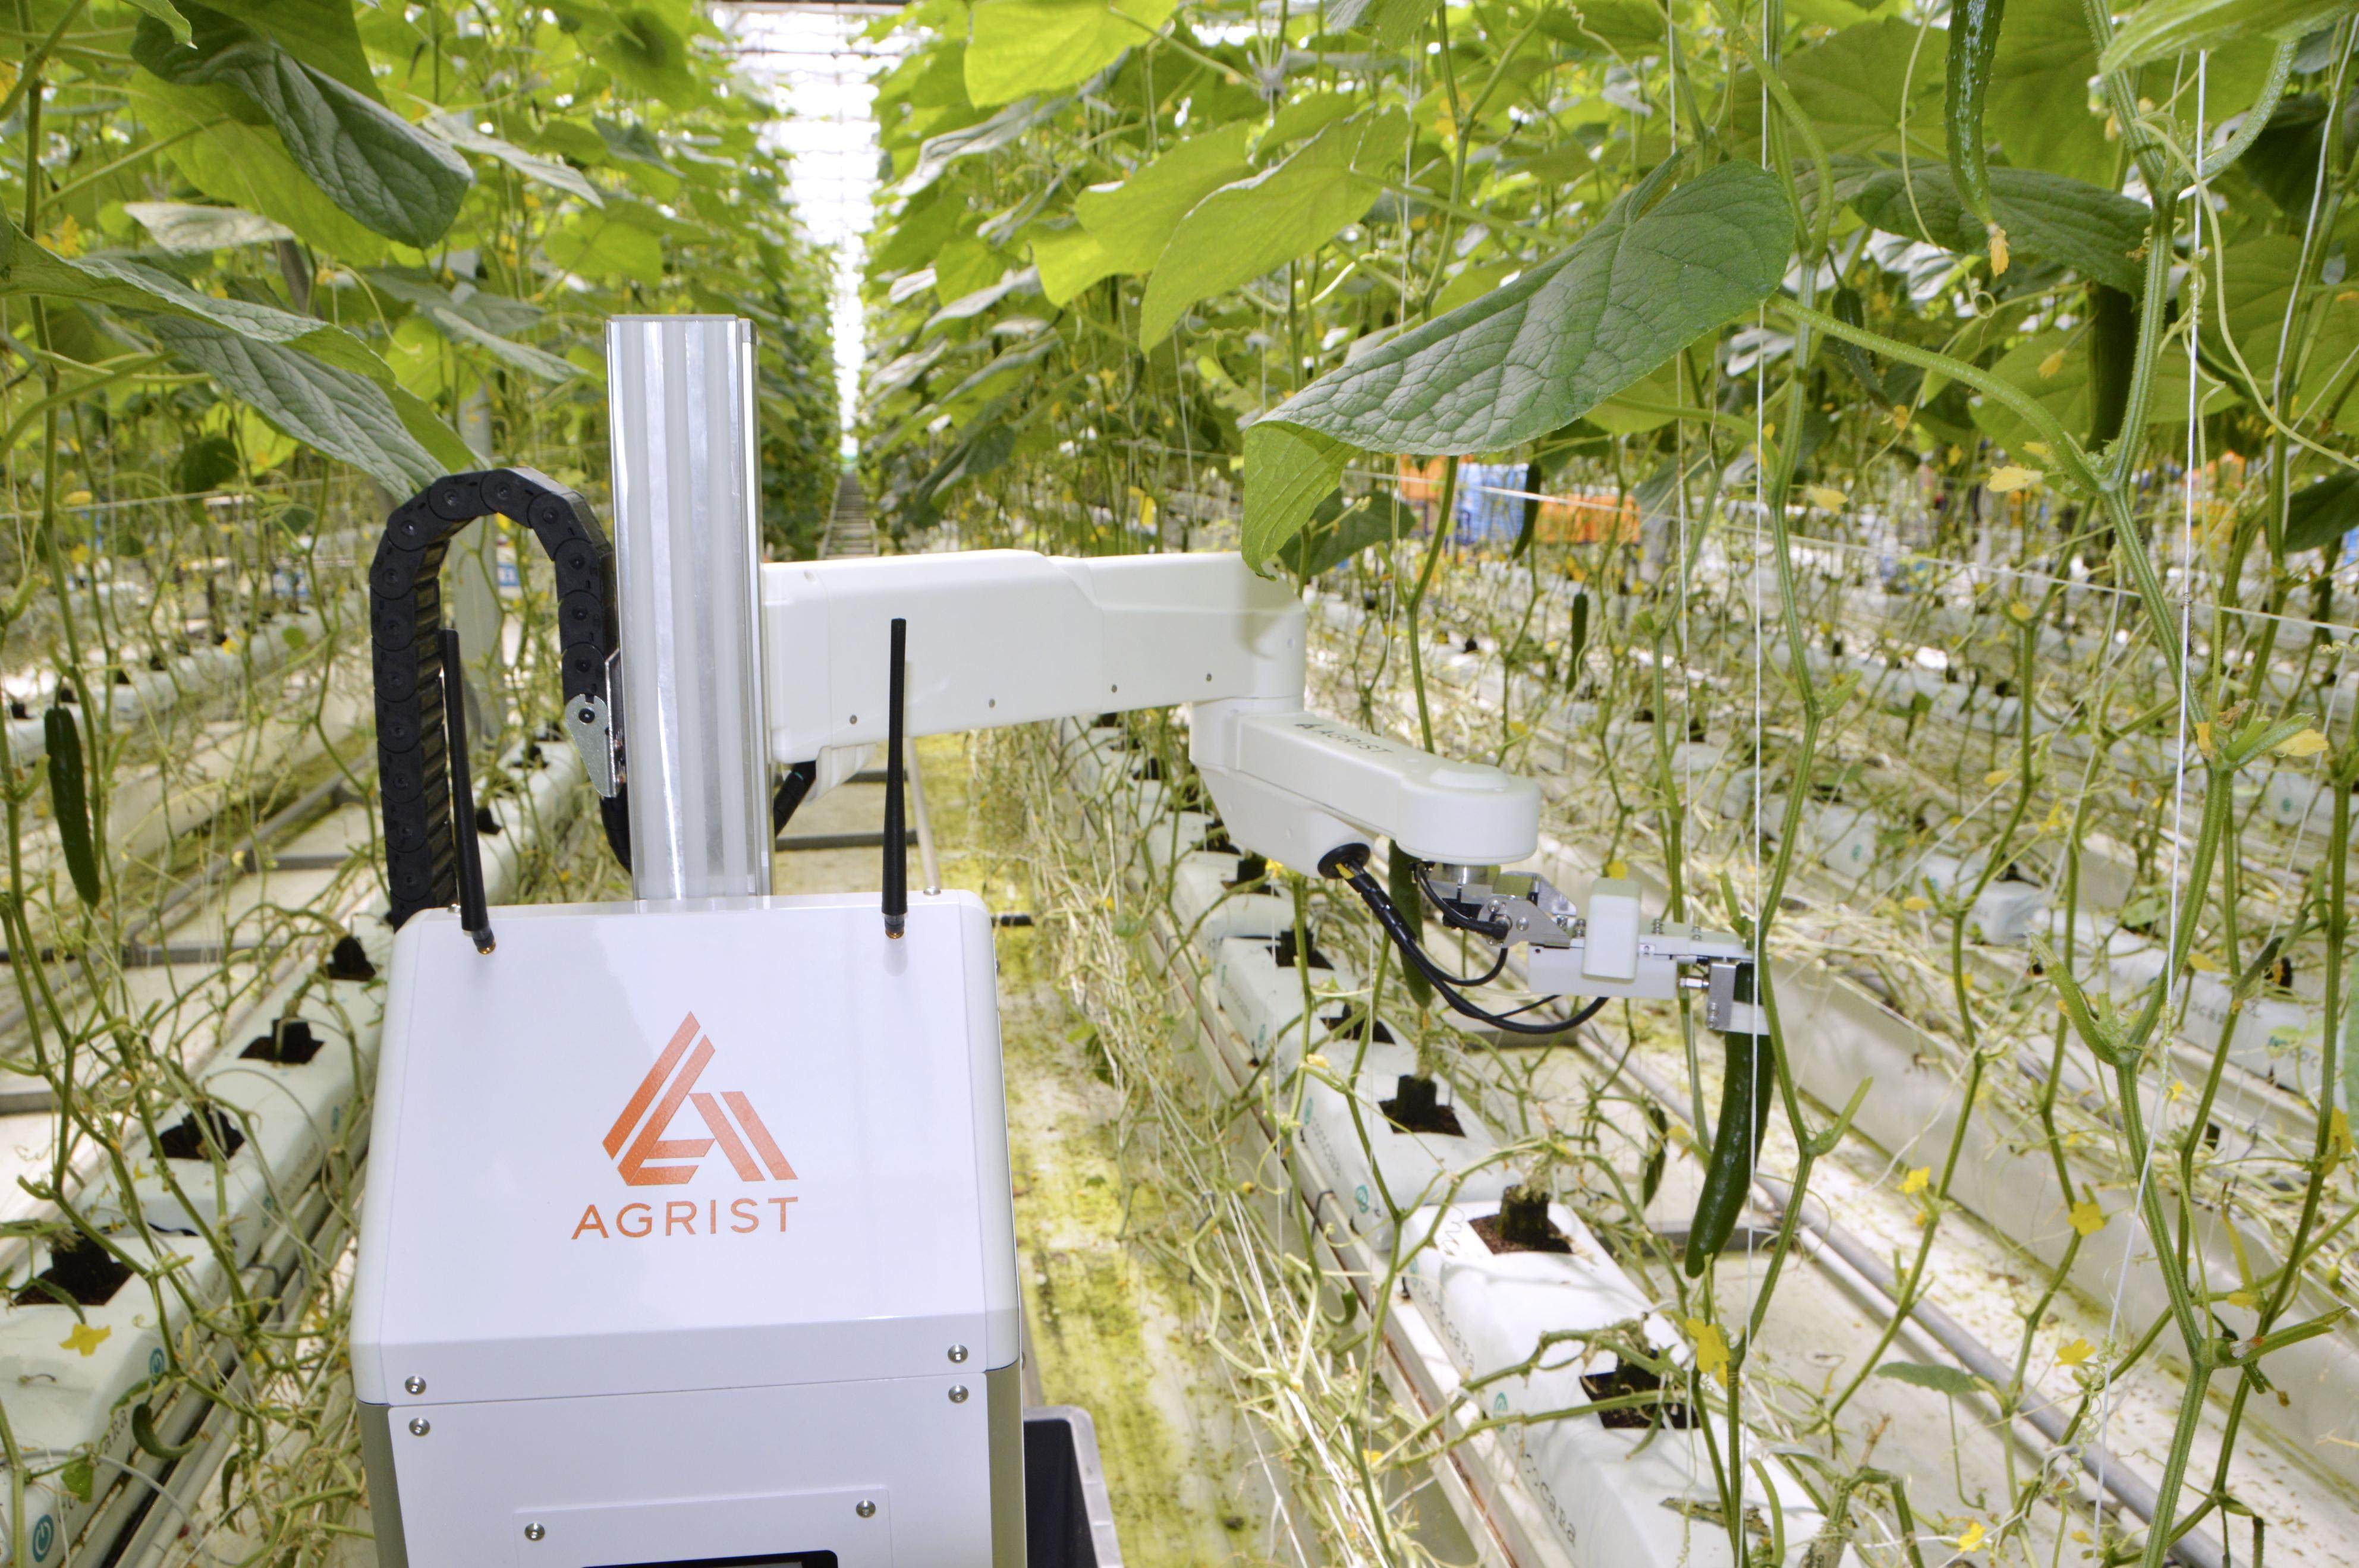 A robot developed by agricultural startup Agrist Inc uses a camera and artificial intelligence to determine if it is the right time to harvest cucumbers in a plastic greenhouse. Photo: Kyodo